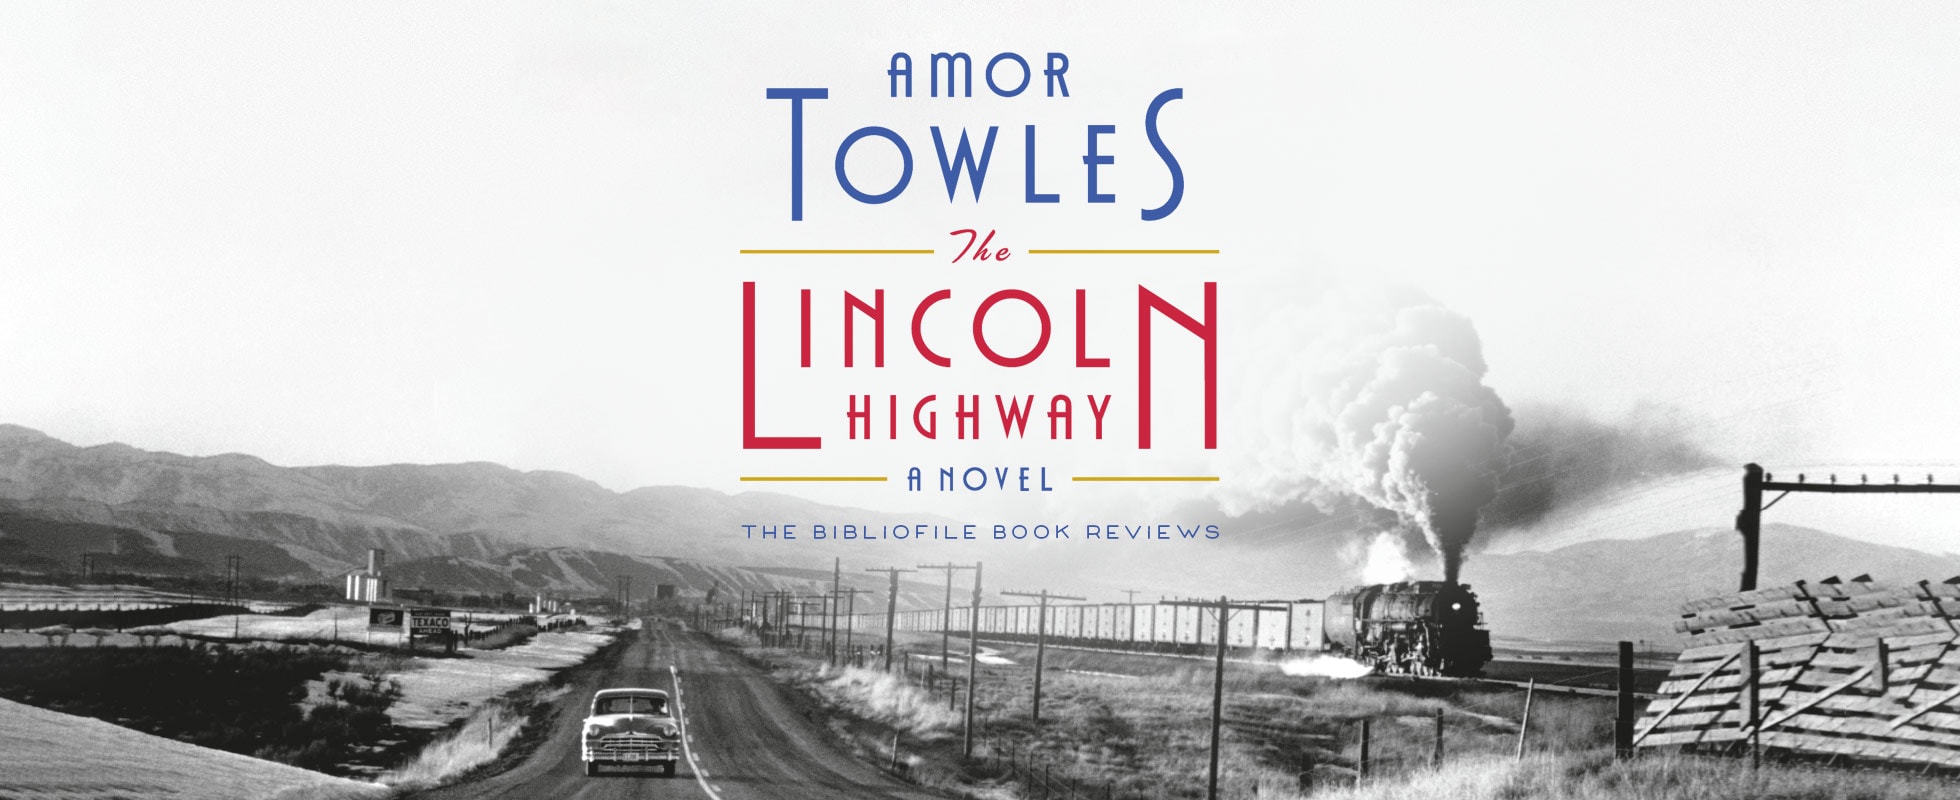 the lincoln highway by amor towles book review plot summary synopsis review ending discussion